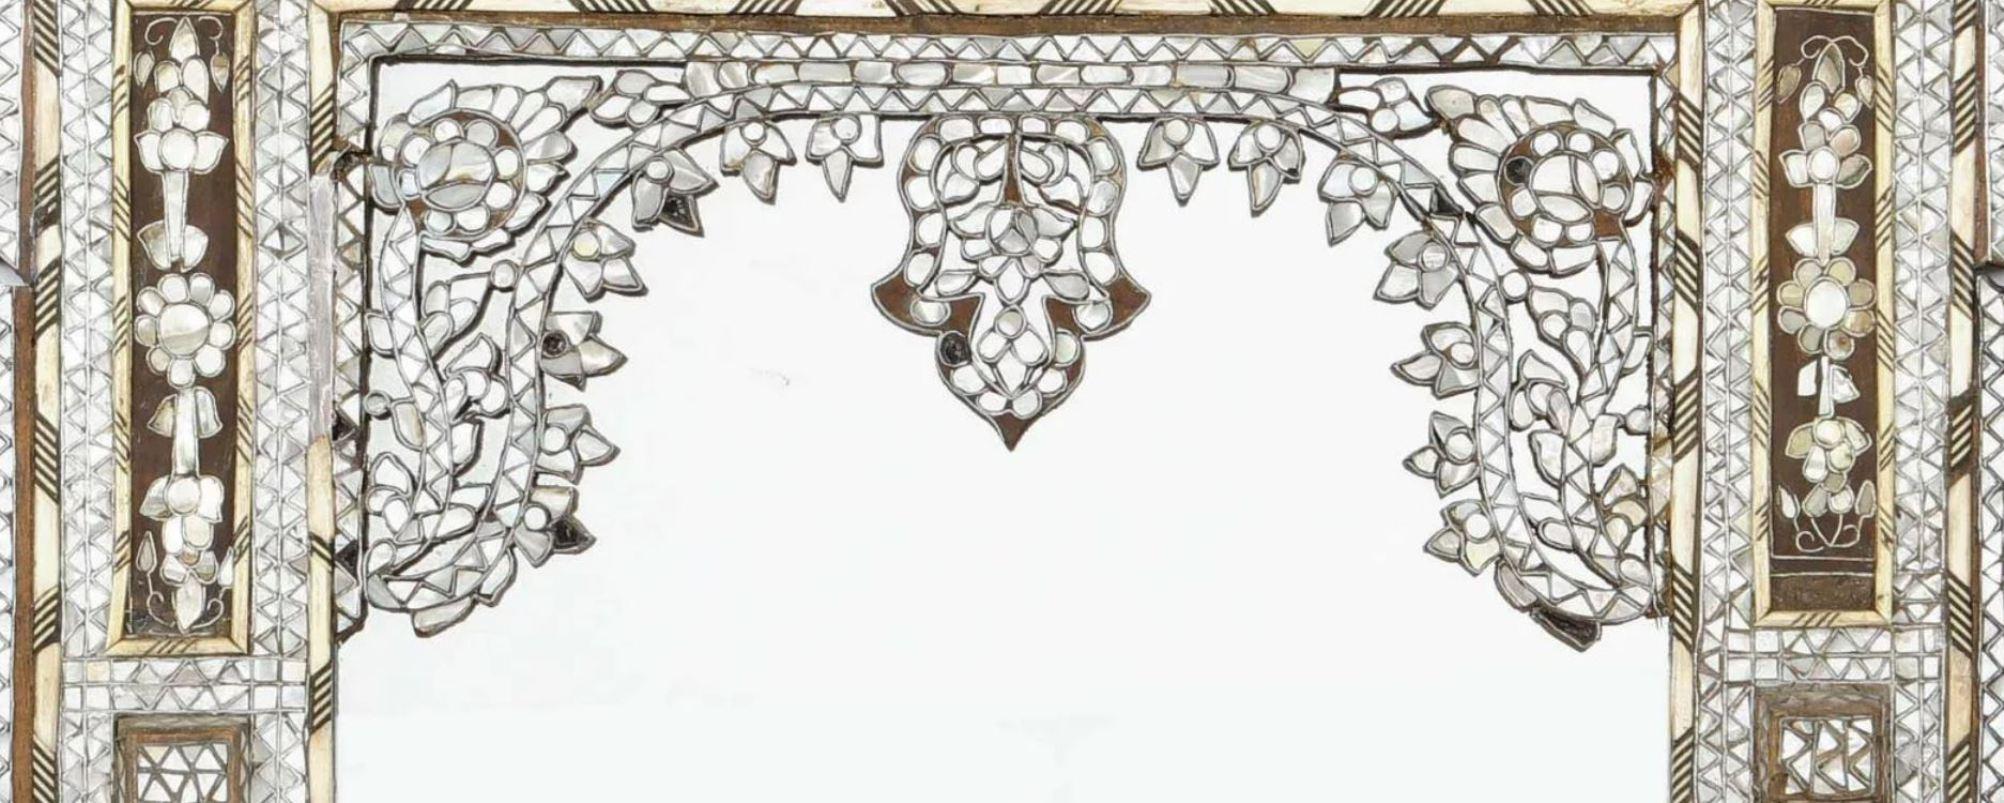 Levantine Mother of Pearl Inlaid Mirror, Late 19th/Early 20th Century 2